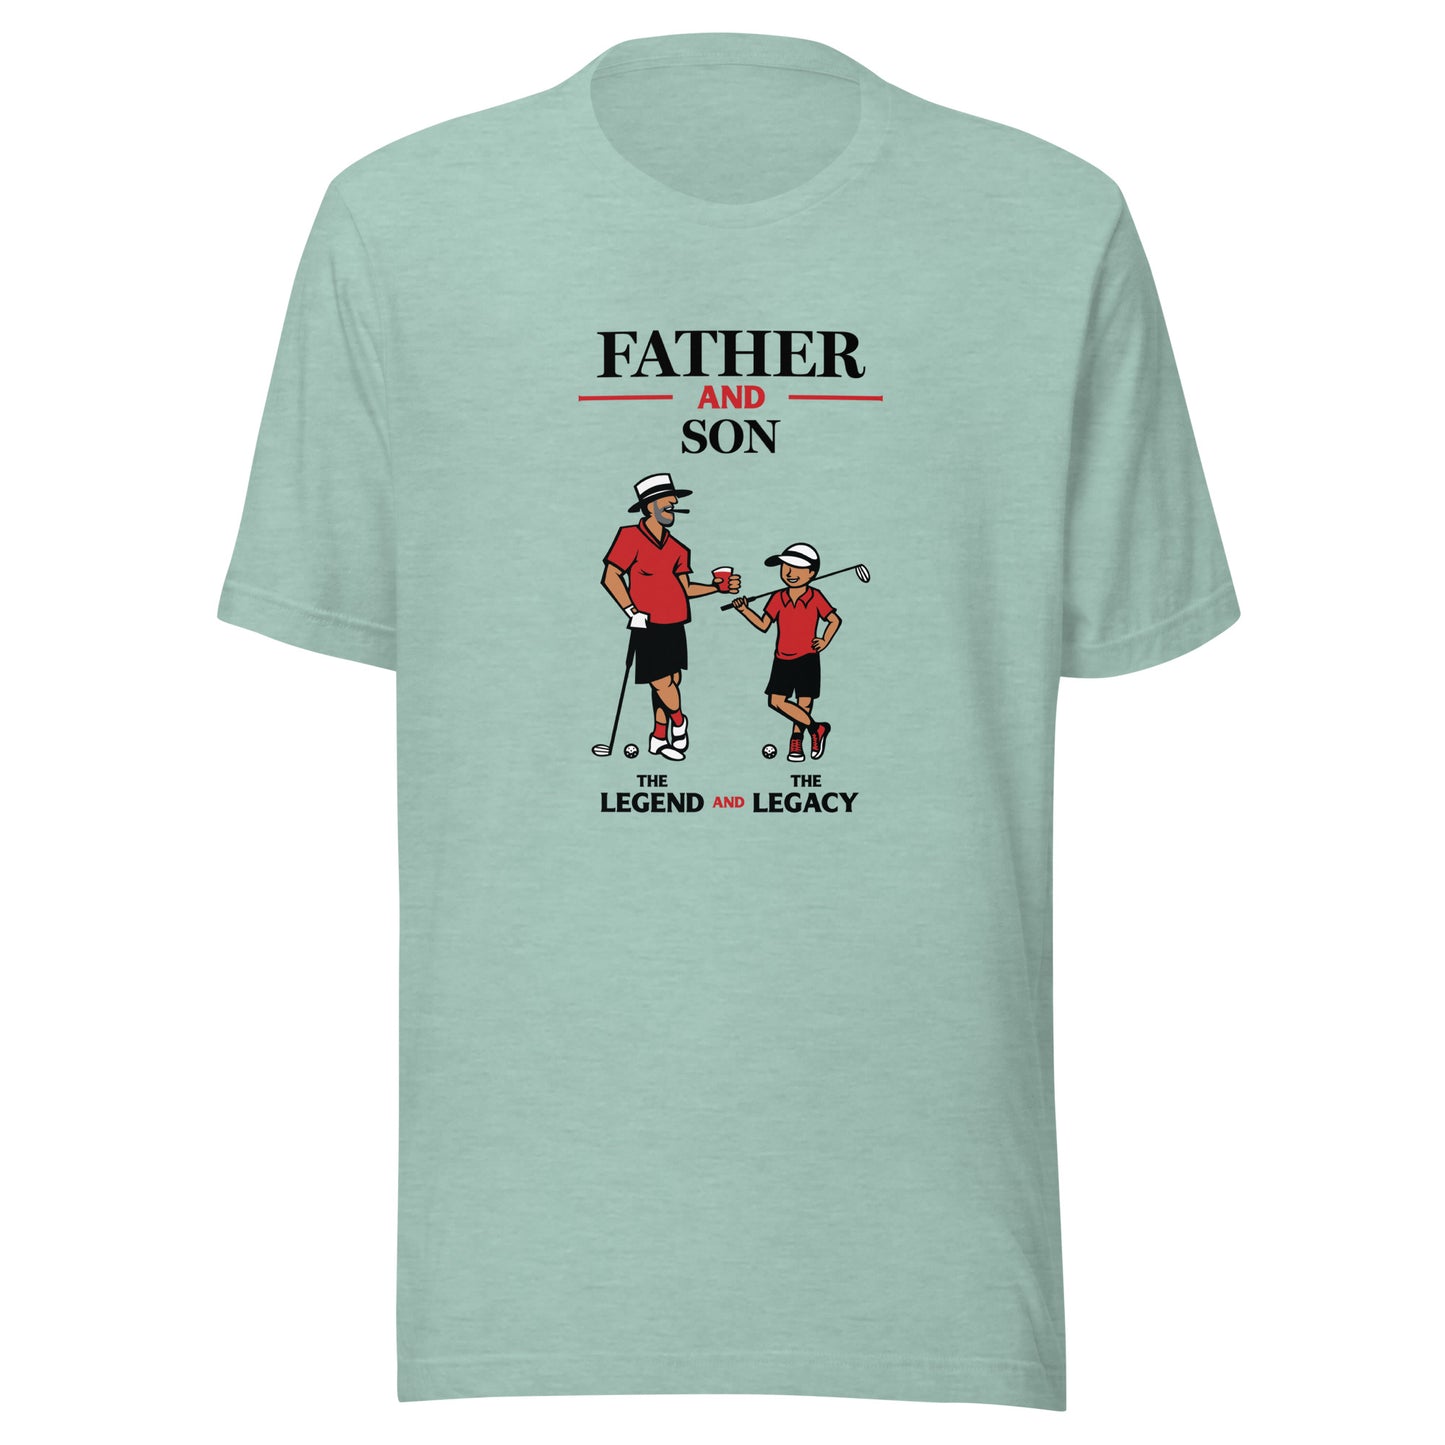 OMG Adult Father/Son Legends t-shirt